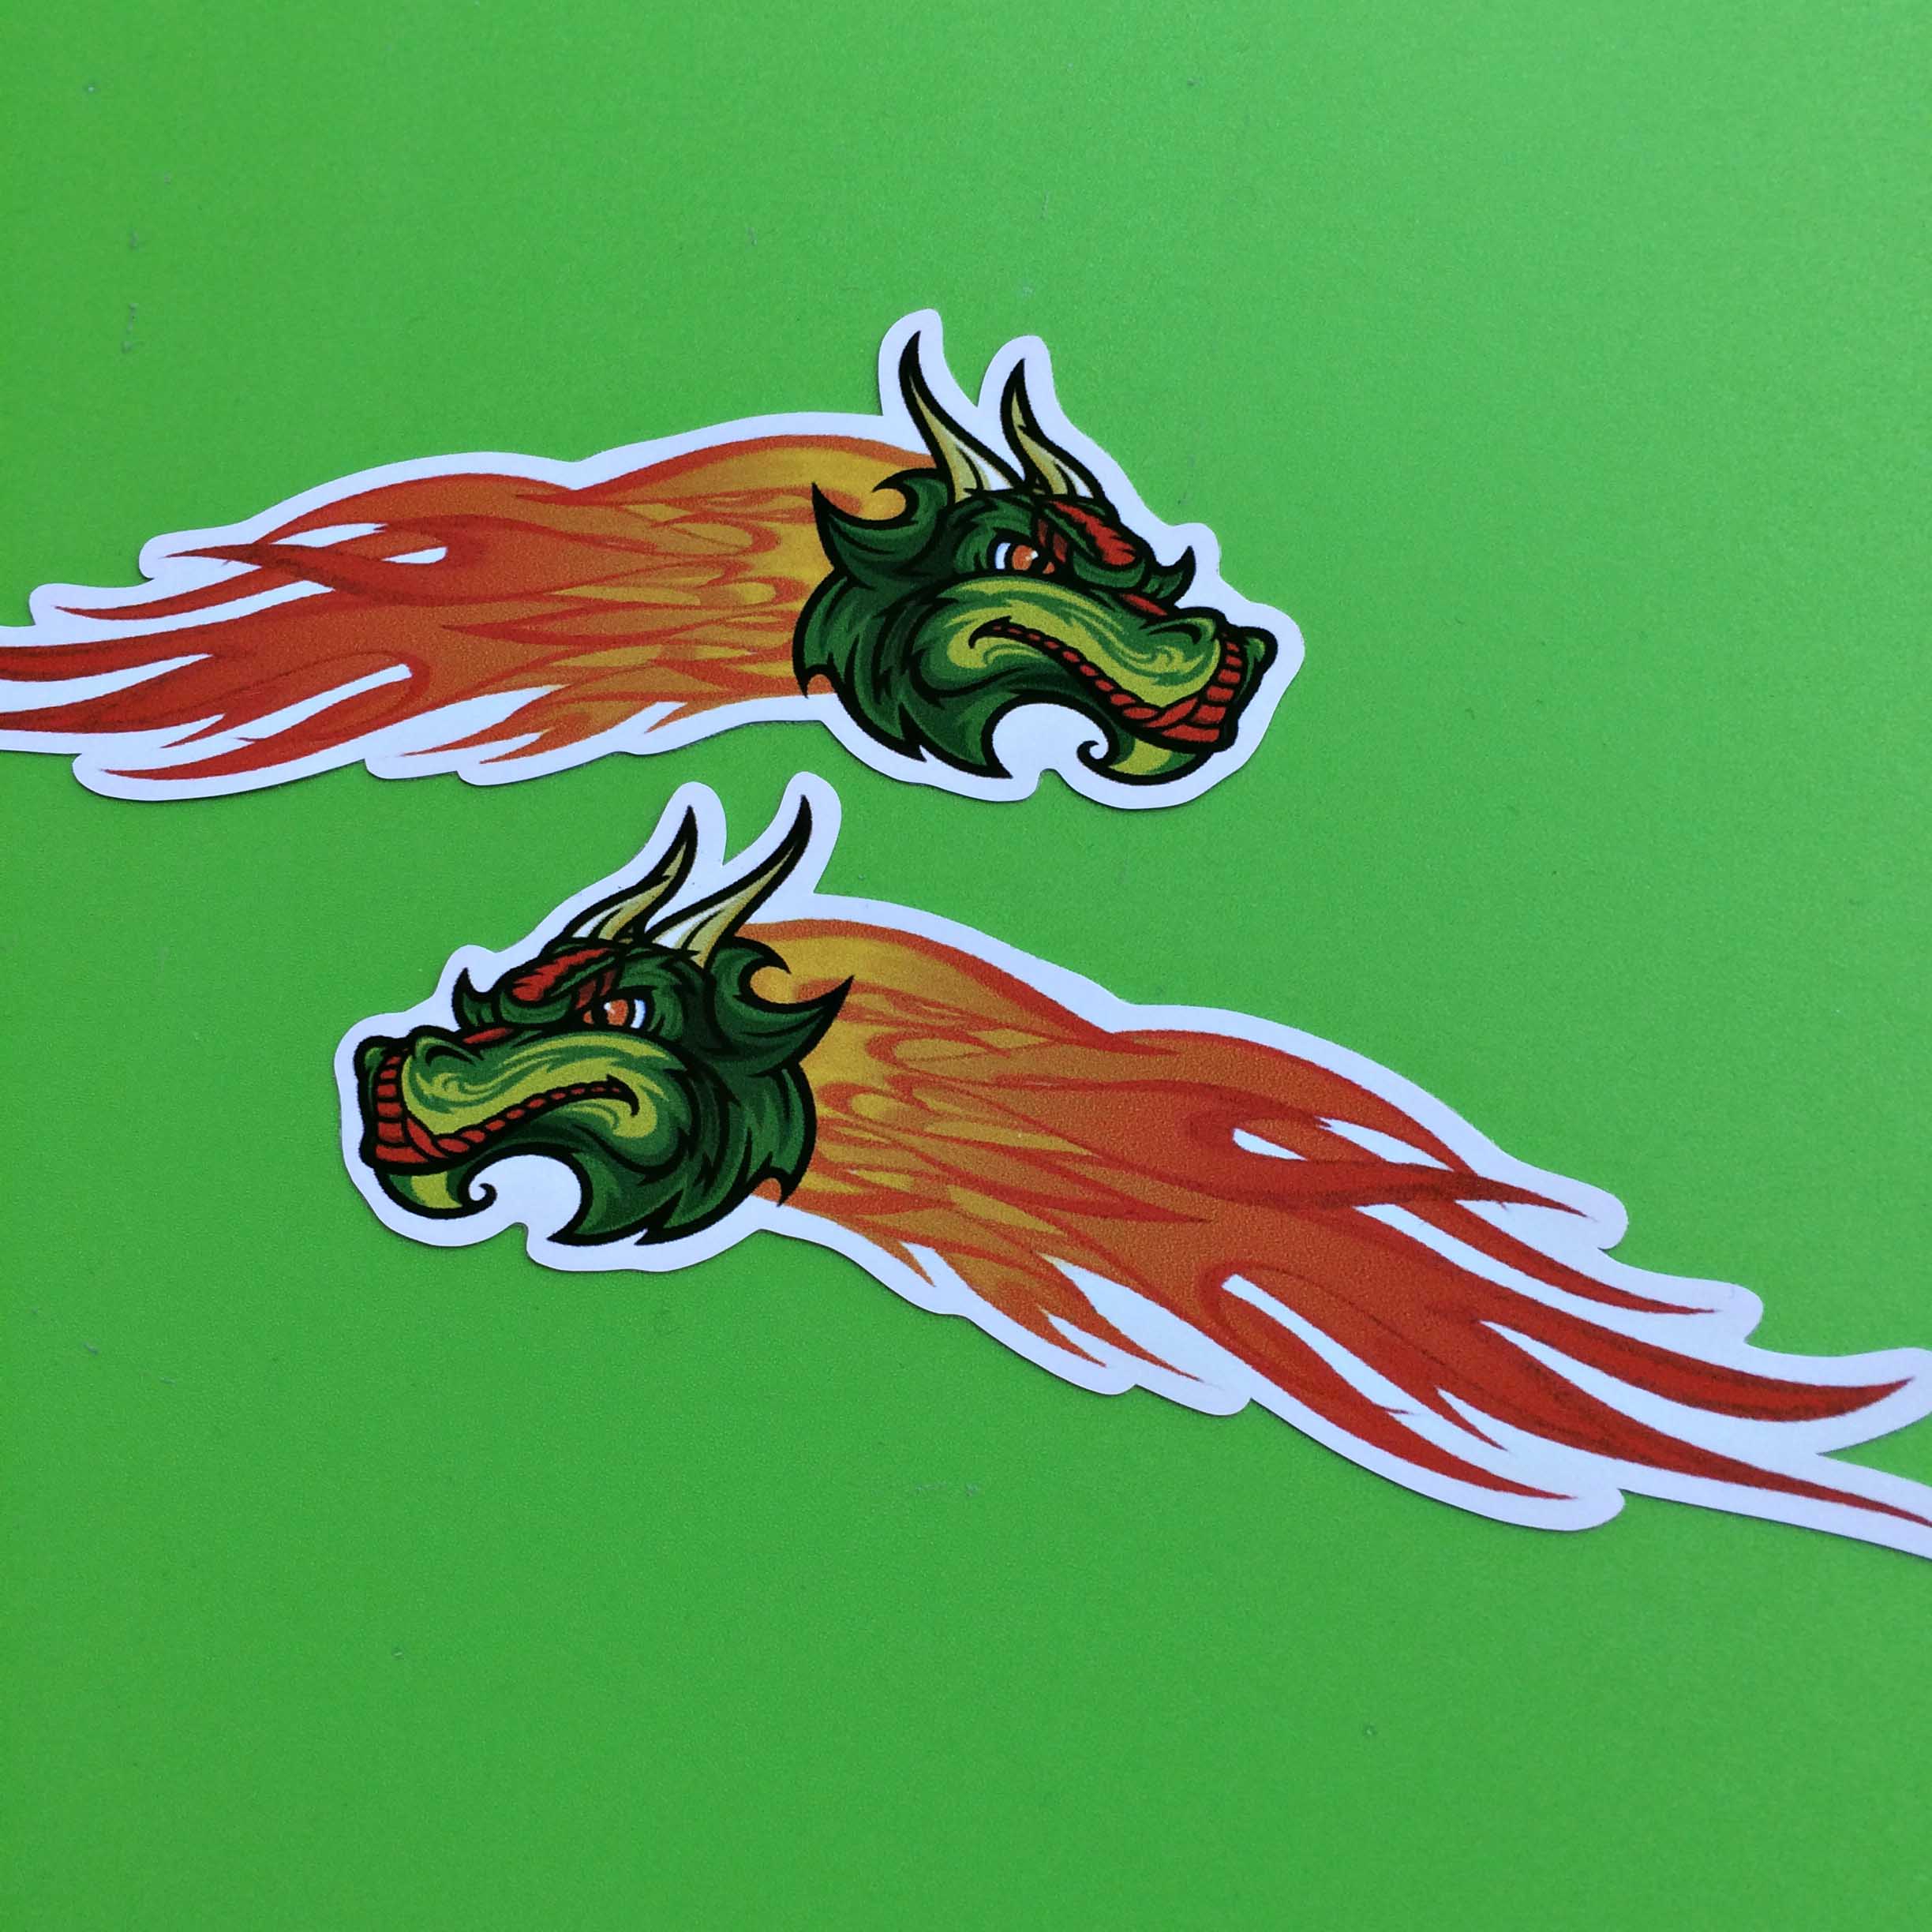 DRAGON FLAMES STICKERS. A head of a dragon, green with horns and piercing red eyes. Orange and red flames are trailing behind.